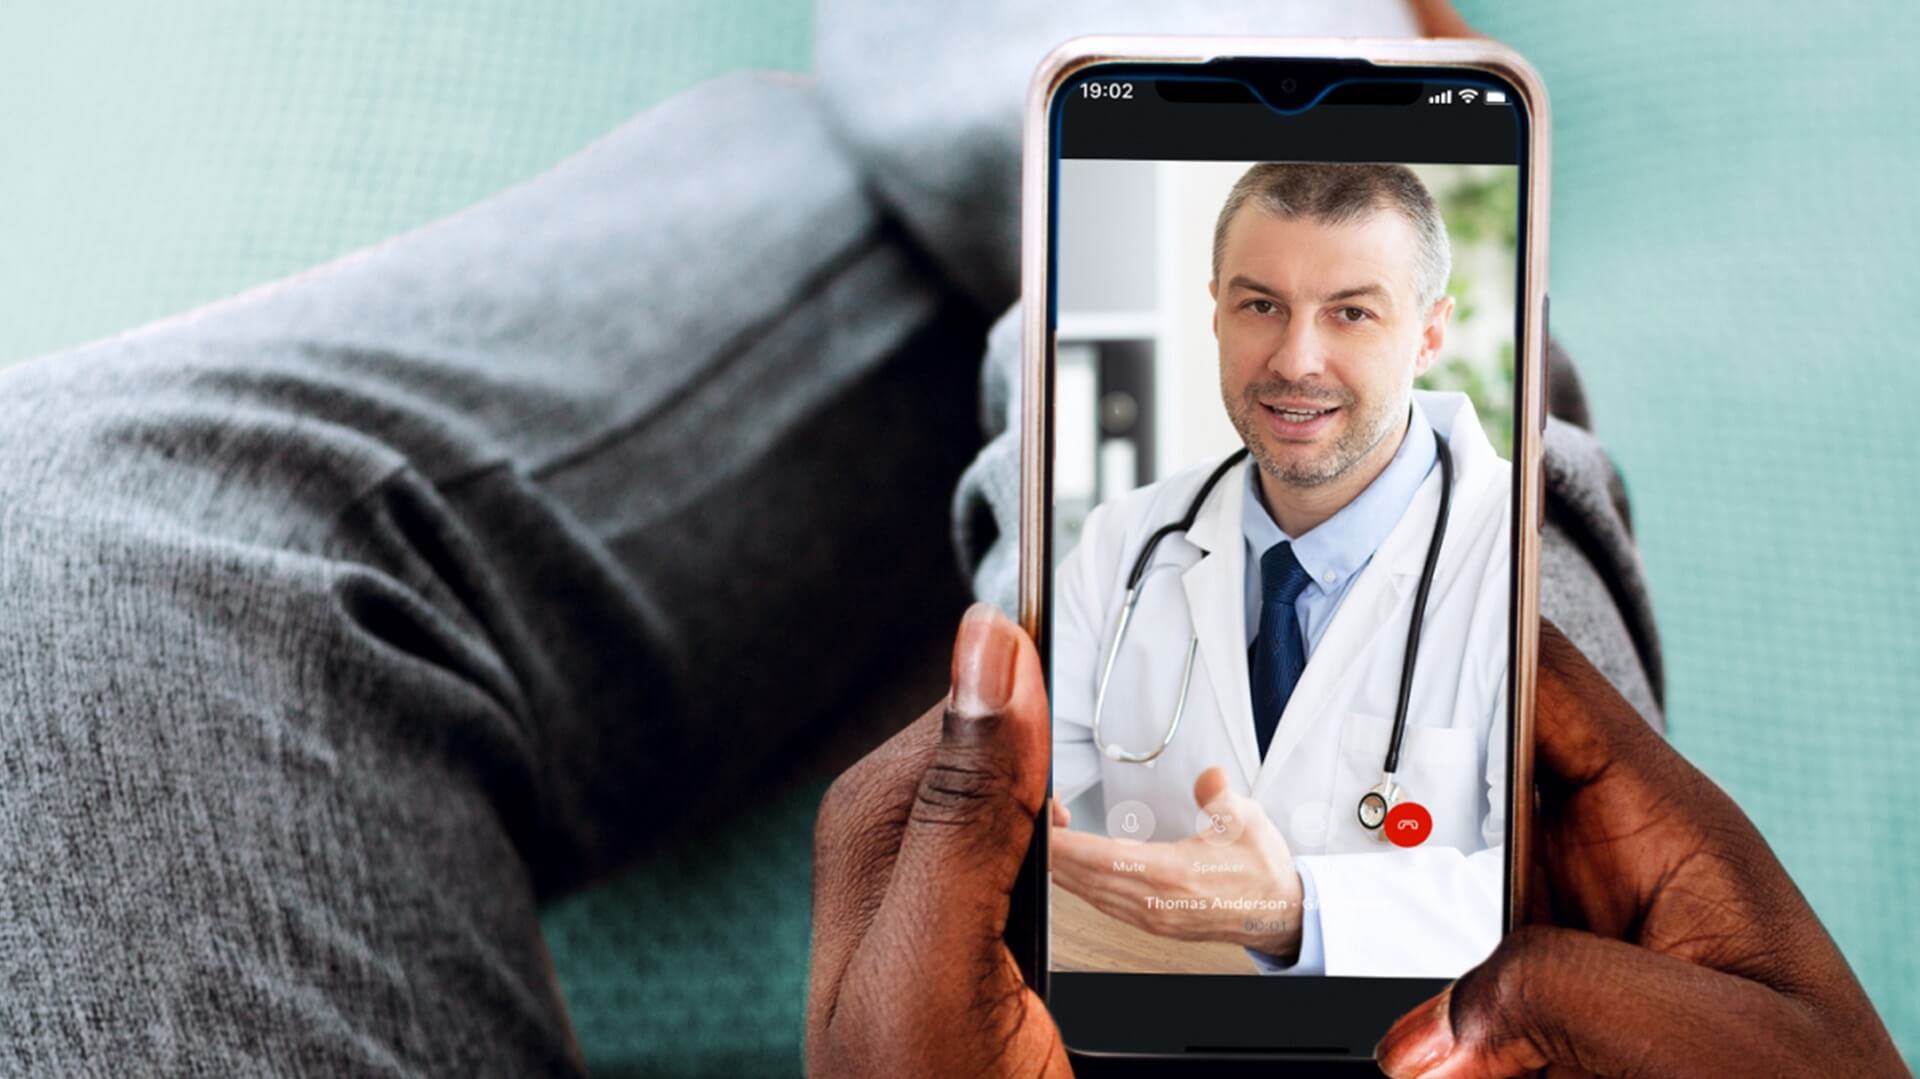 Patient speaks with a doctor virtually on video chat